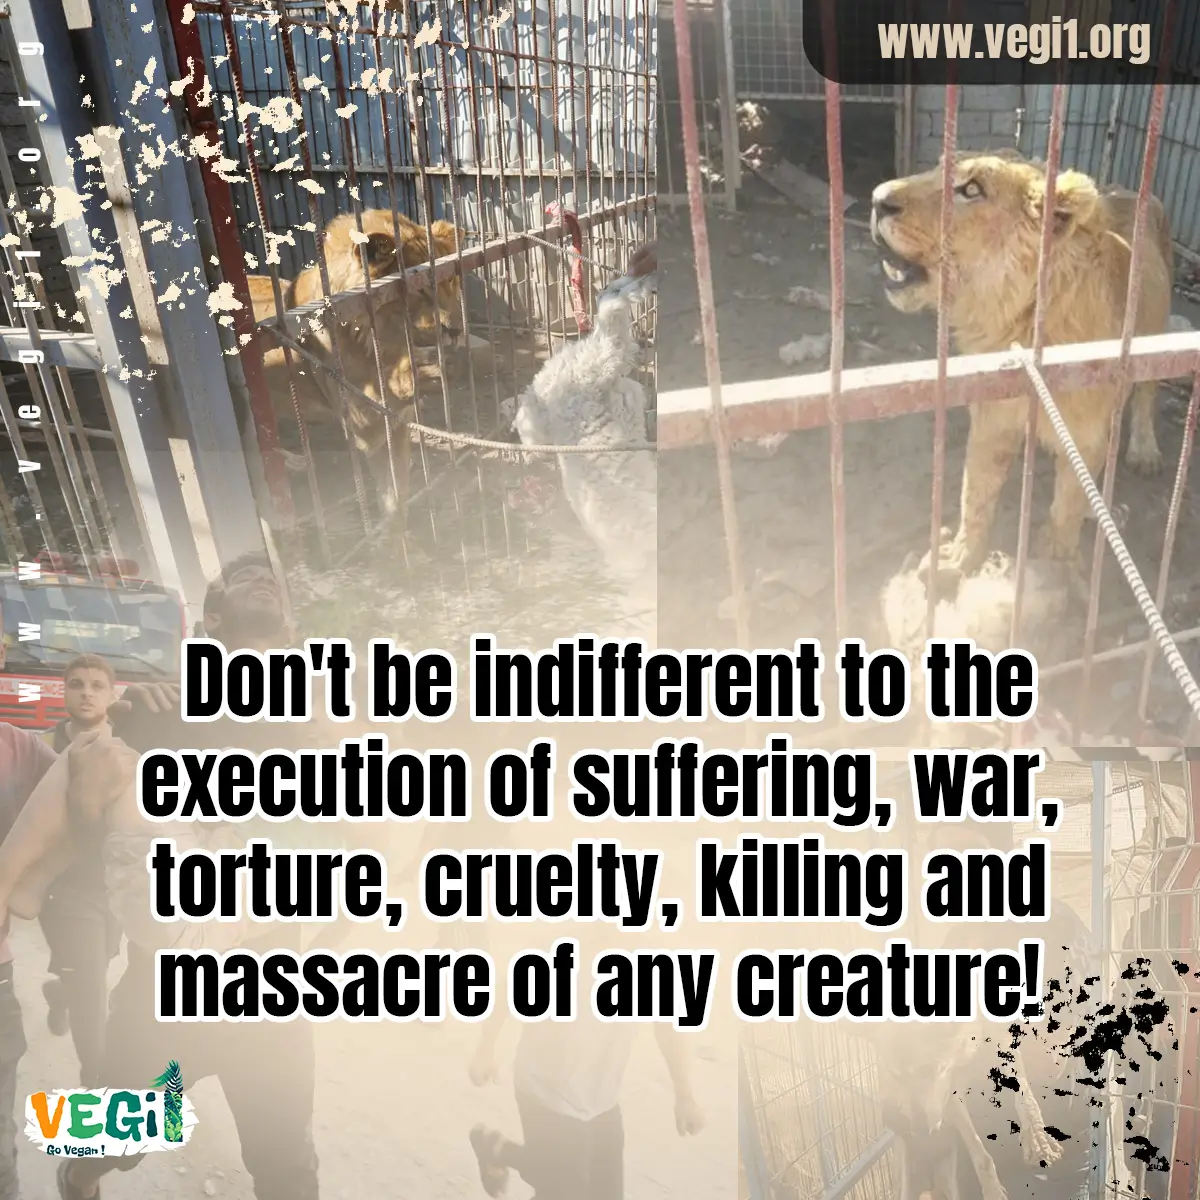 Don't be indifferent to the execution of suffering, war, torture, cruelty, killing and massacre of any creature!